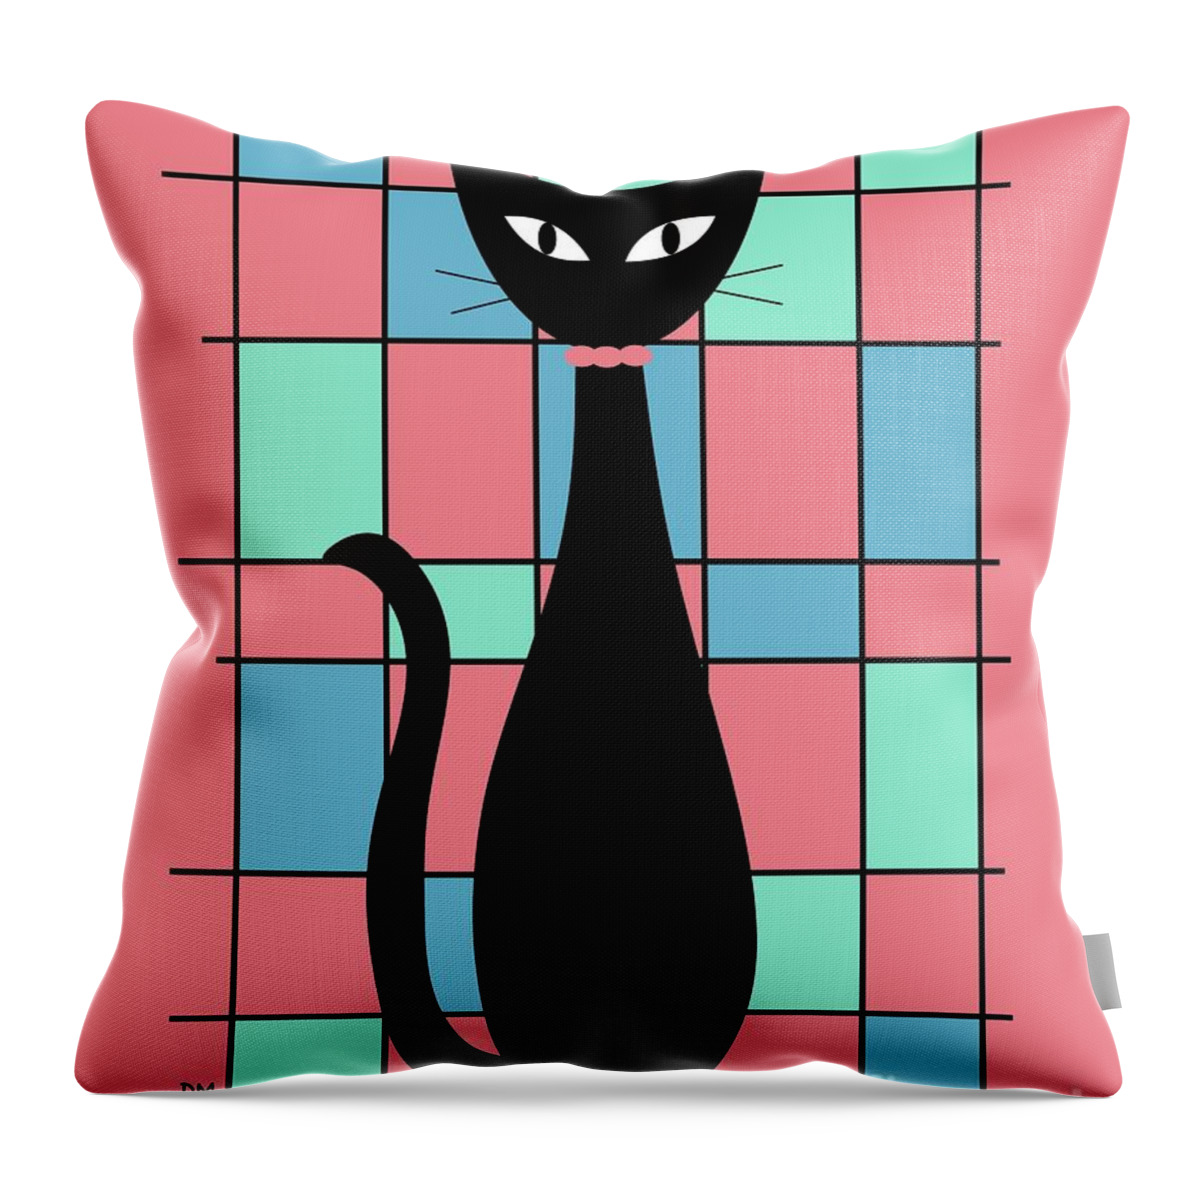  Throw Pillow featuring the digital art Abstract Cat in Pink by Donna Mibus